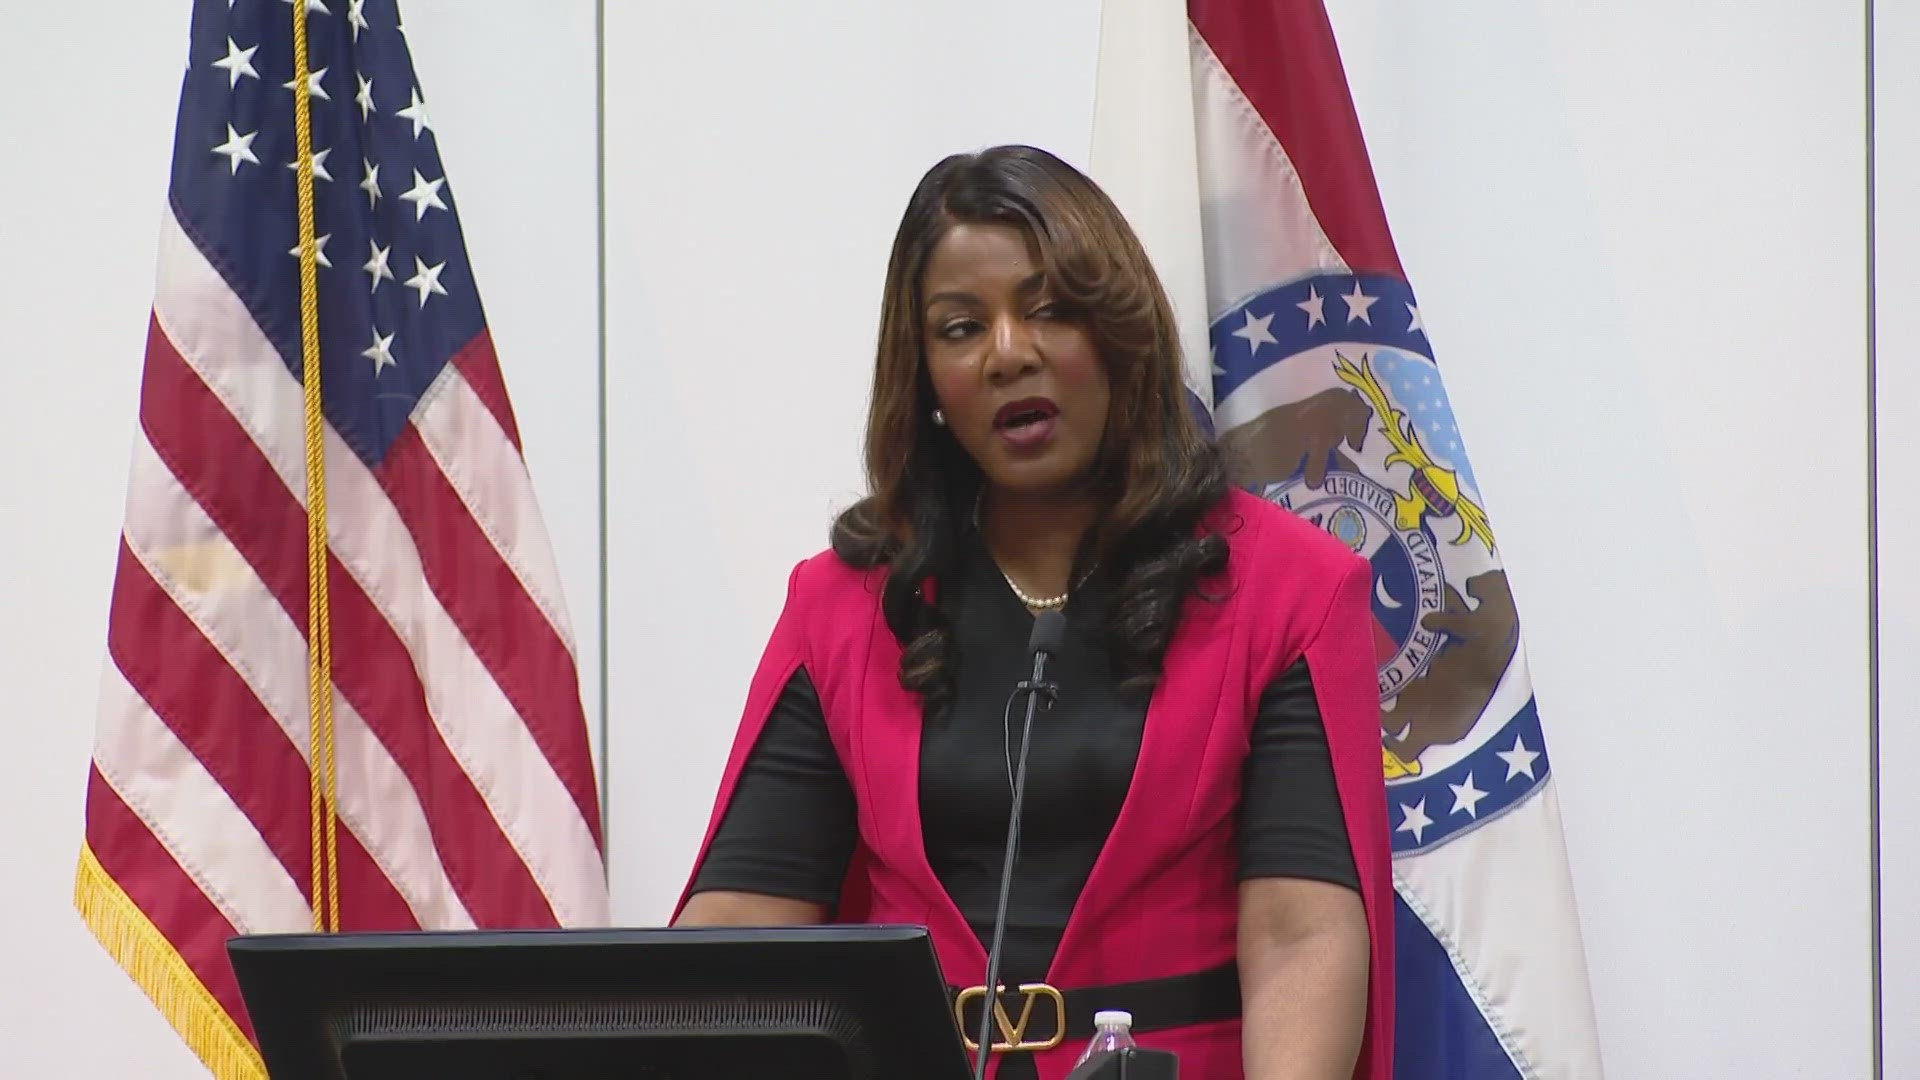 Jones touched on public safety, education and the economy of the city. She also laid out a plan to increase the population of the city by welcoming immigrants.